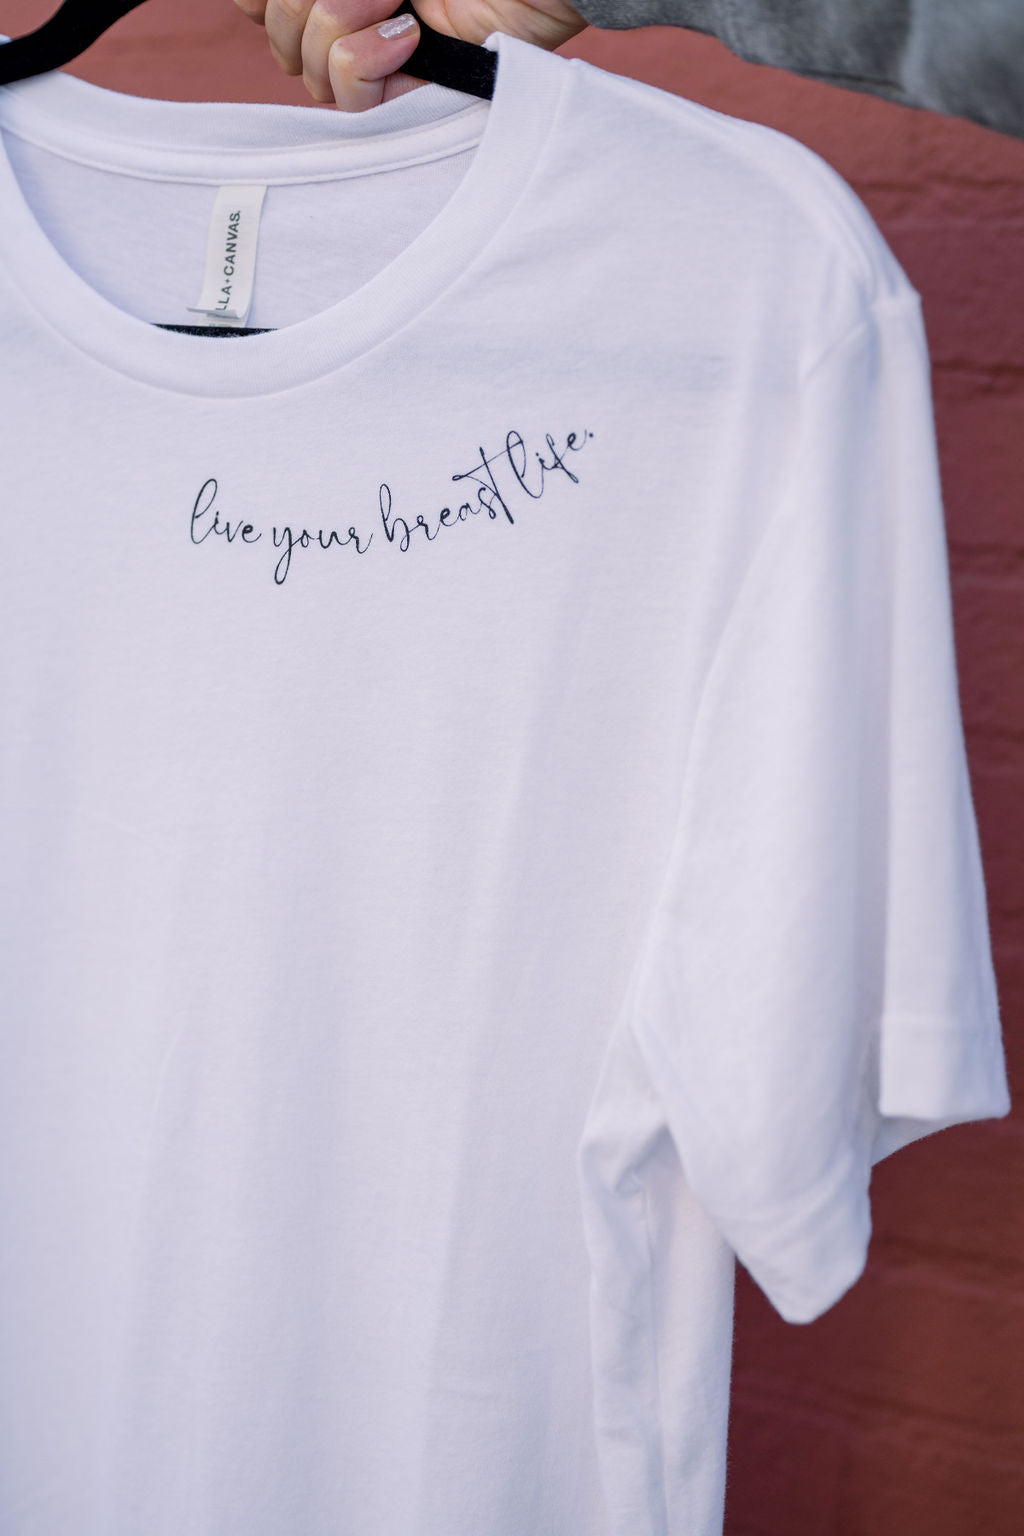 Live Your Breast Life Script Tee